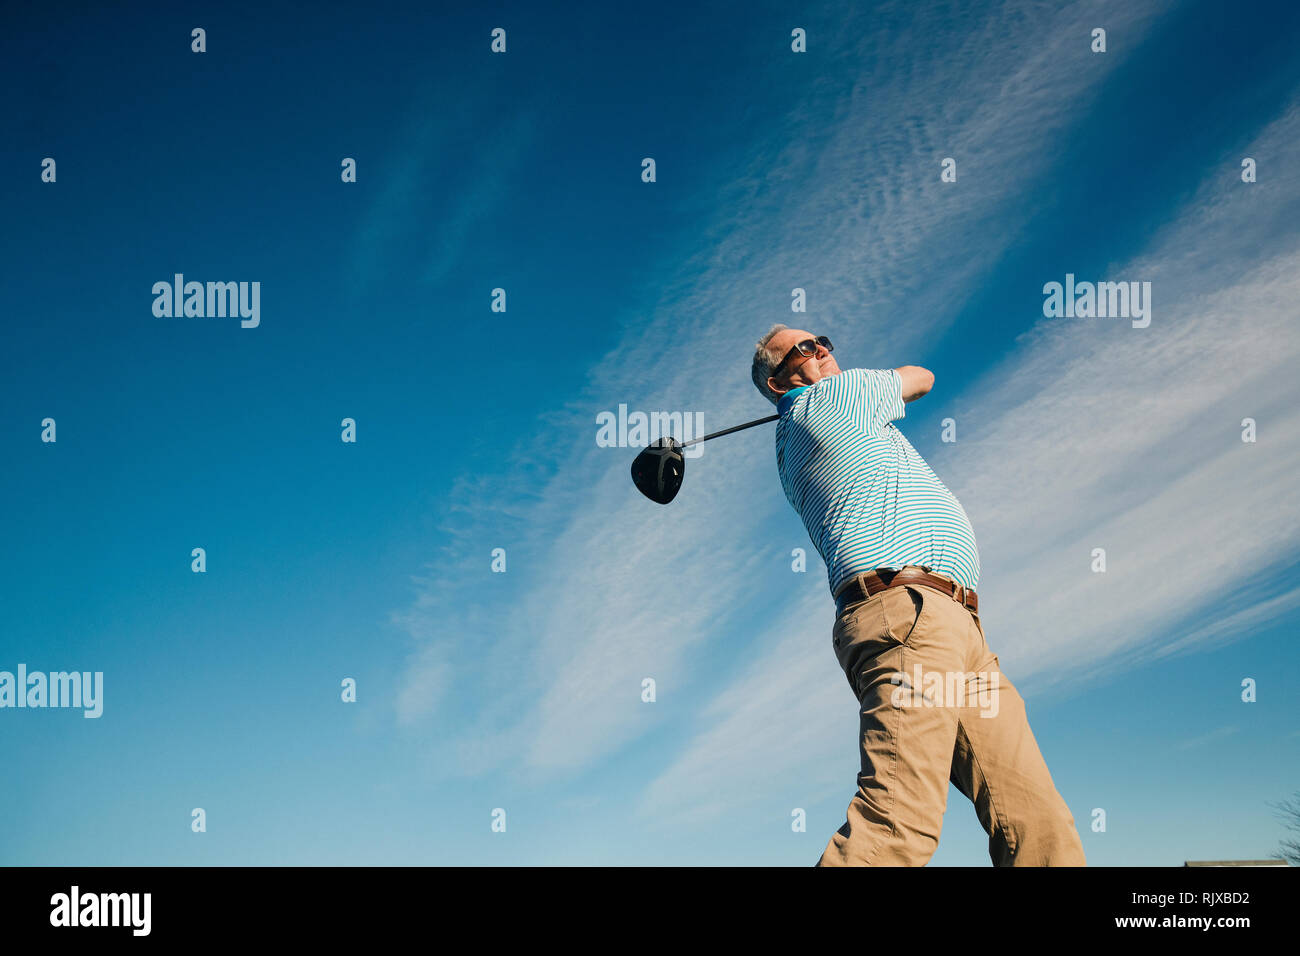 Ball perspective shot of a senior man swinging a golf club. Stock Photo